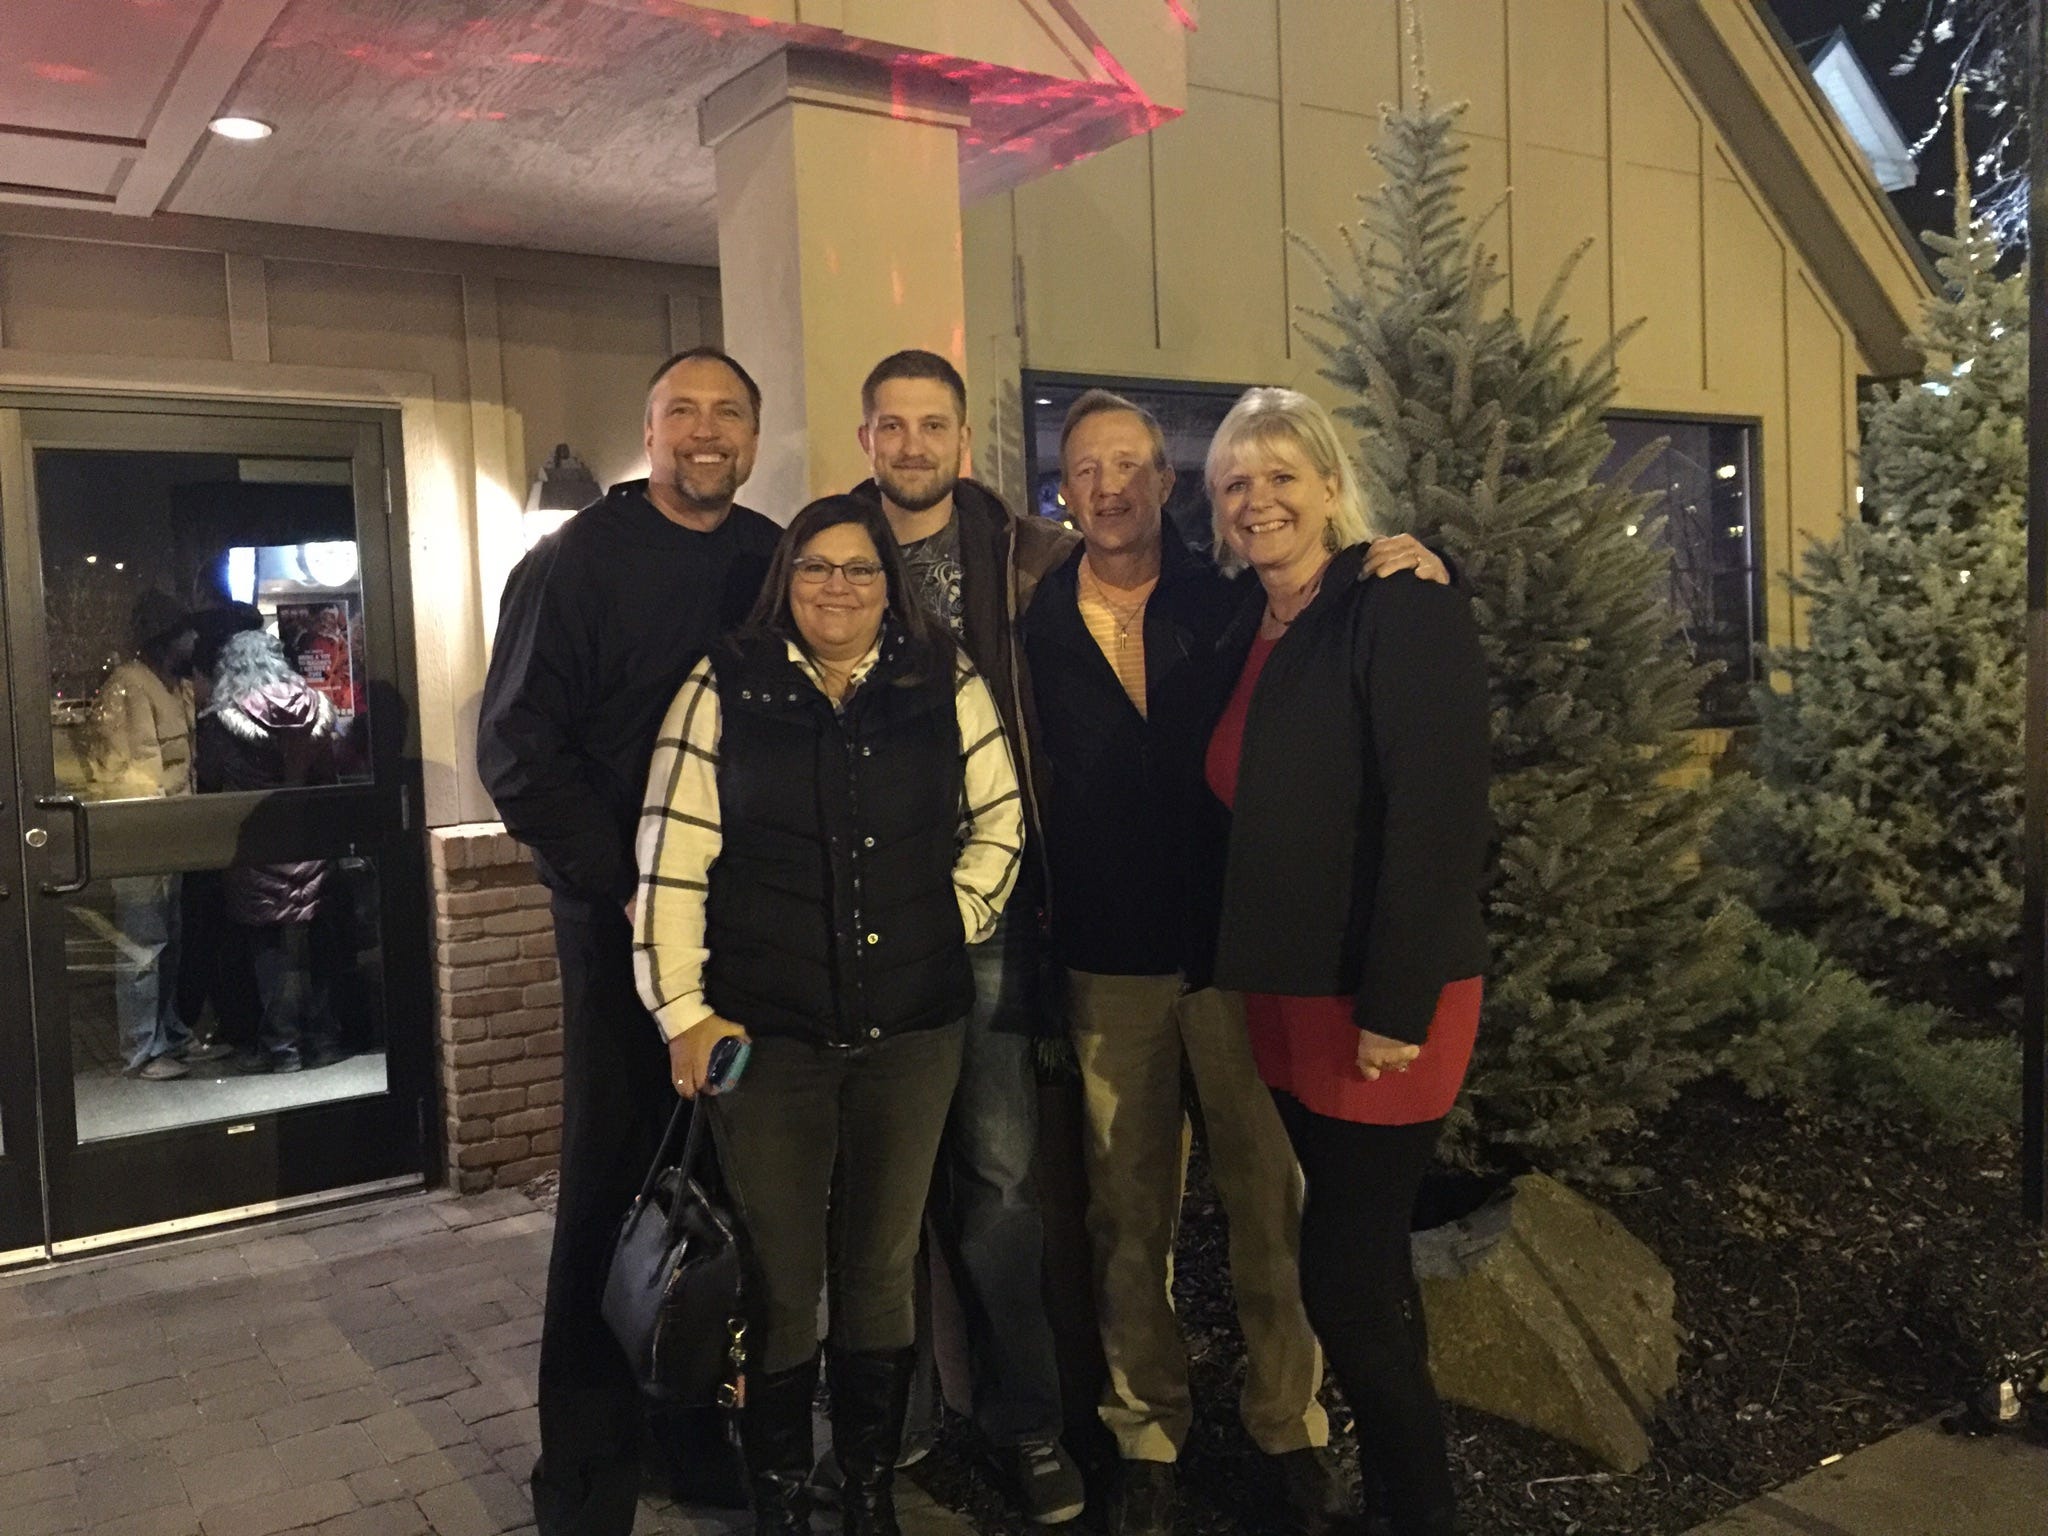 Left to right are Tim, Mary, and Nate Gabrelcik, and David and Cheryl Watkins. After learning of David's kidney failure, Nate offered to donate a kidney. "This was the night we all got together to meet as a new family," David Watkins said. [Special to the Press Gazette]